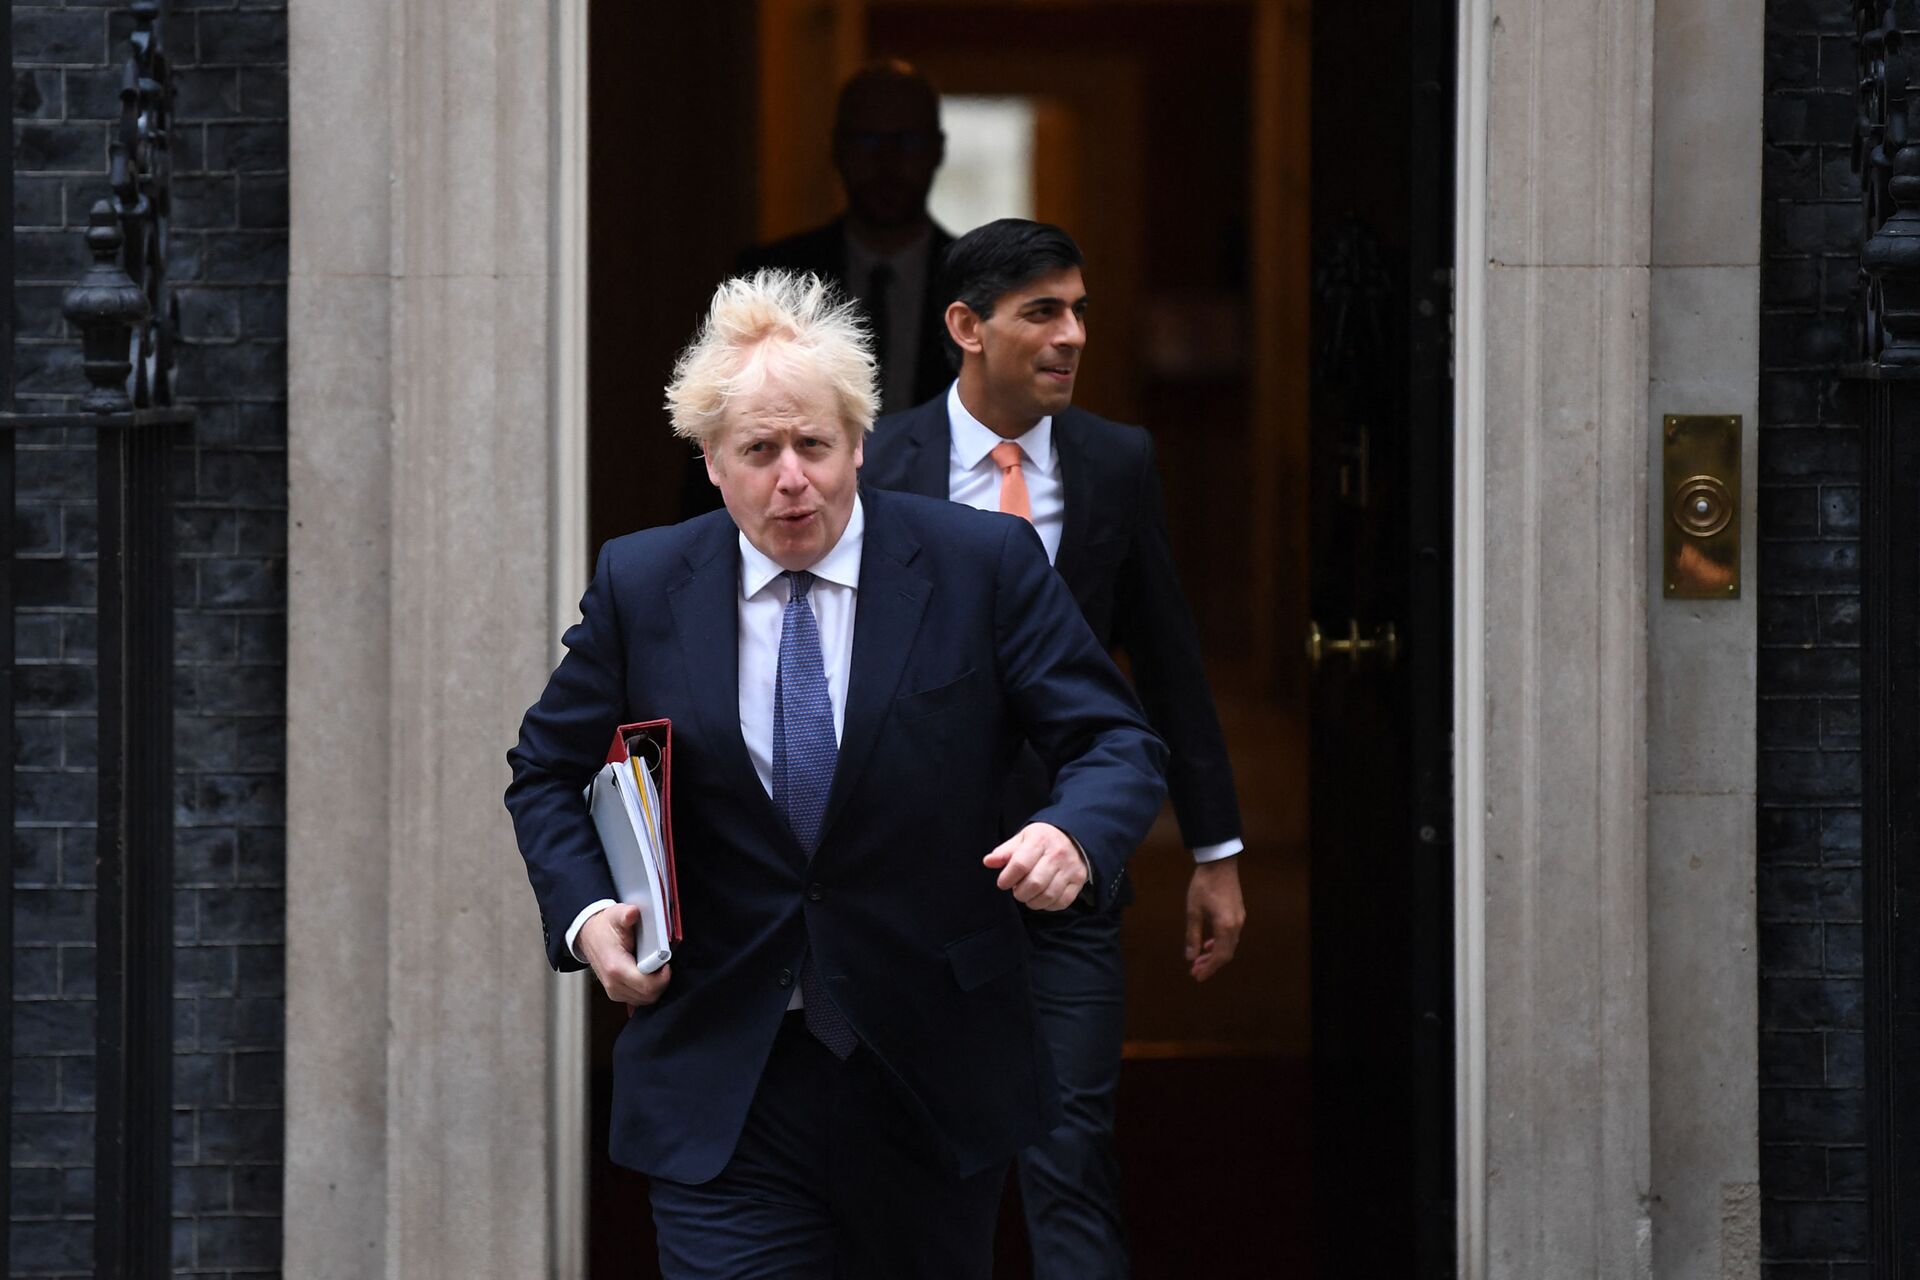 Britain's Prime Minister Boris Johnson (L) and Britain's Chancellor of the Exchequer Rishi Sunak (R) leave 10 Downing Street to attend the weekly cabinet meeting in London on October 13, 2020 held at the Foreign, Commonwealth and Development Office - Sputnik International, 1920, 15.09.2021